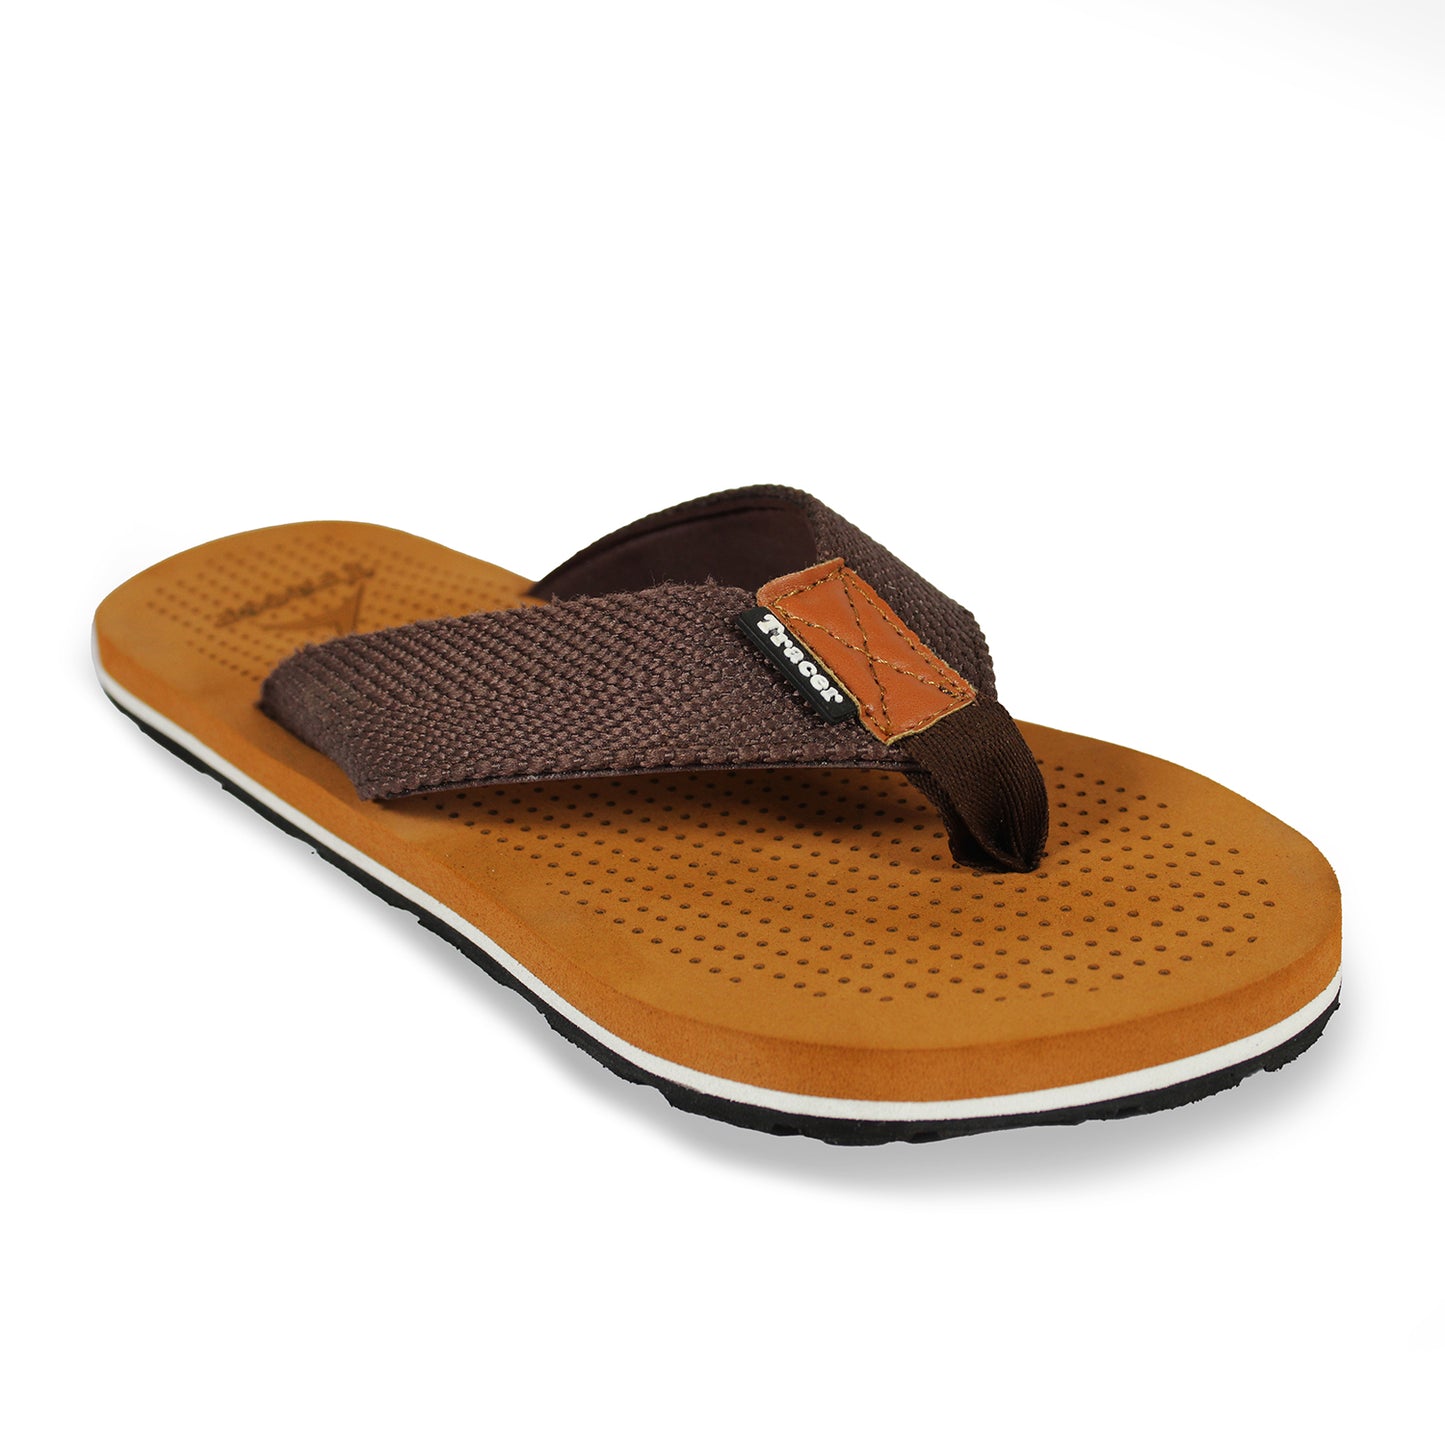 Tracer Slippers| Tan | Men's Collection